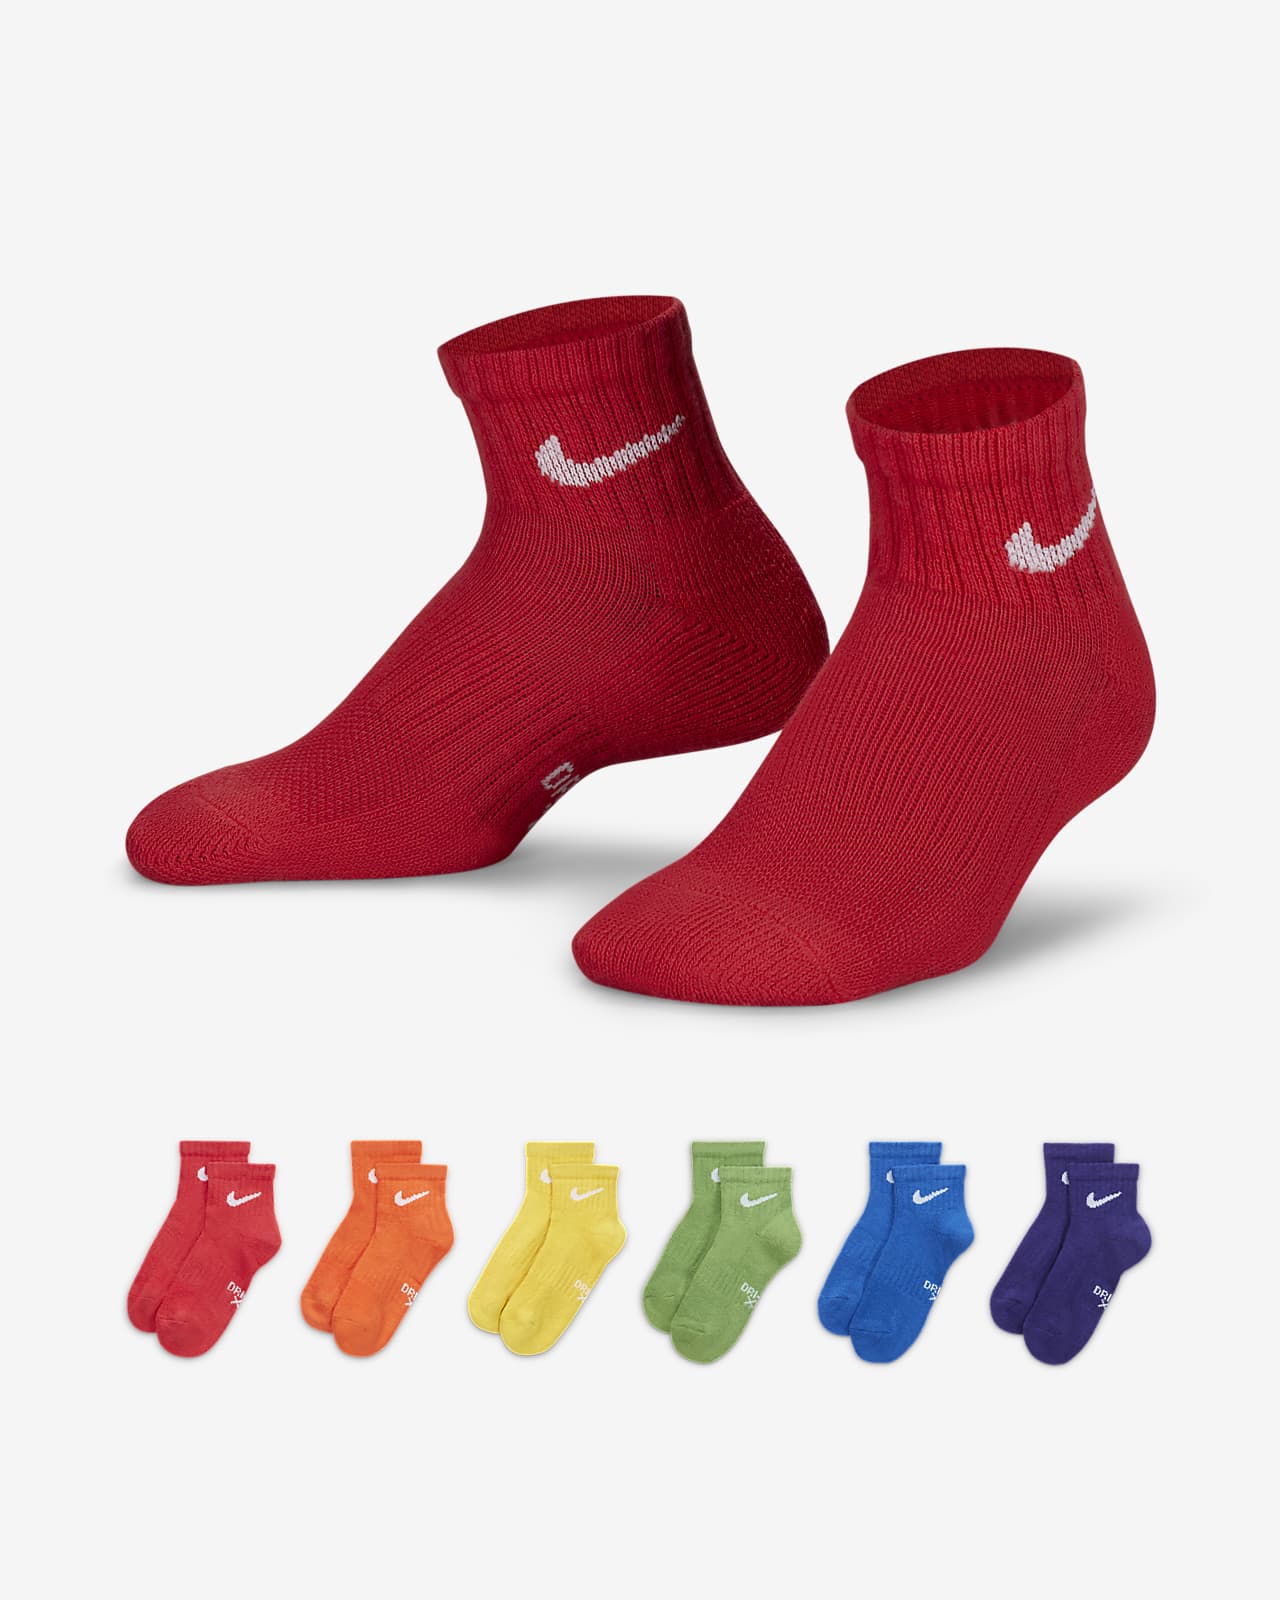 Nike Dri-FIT Younger Kids' Ankle Socks (6-Pack)